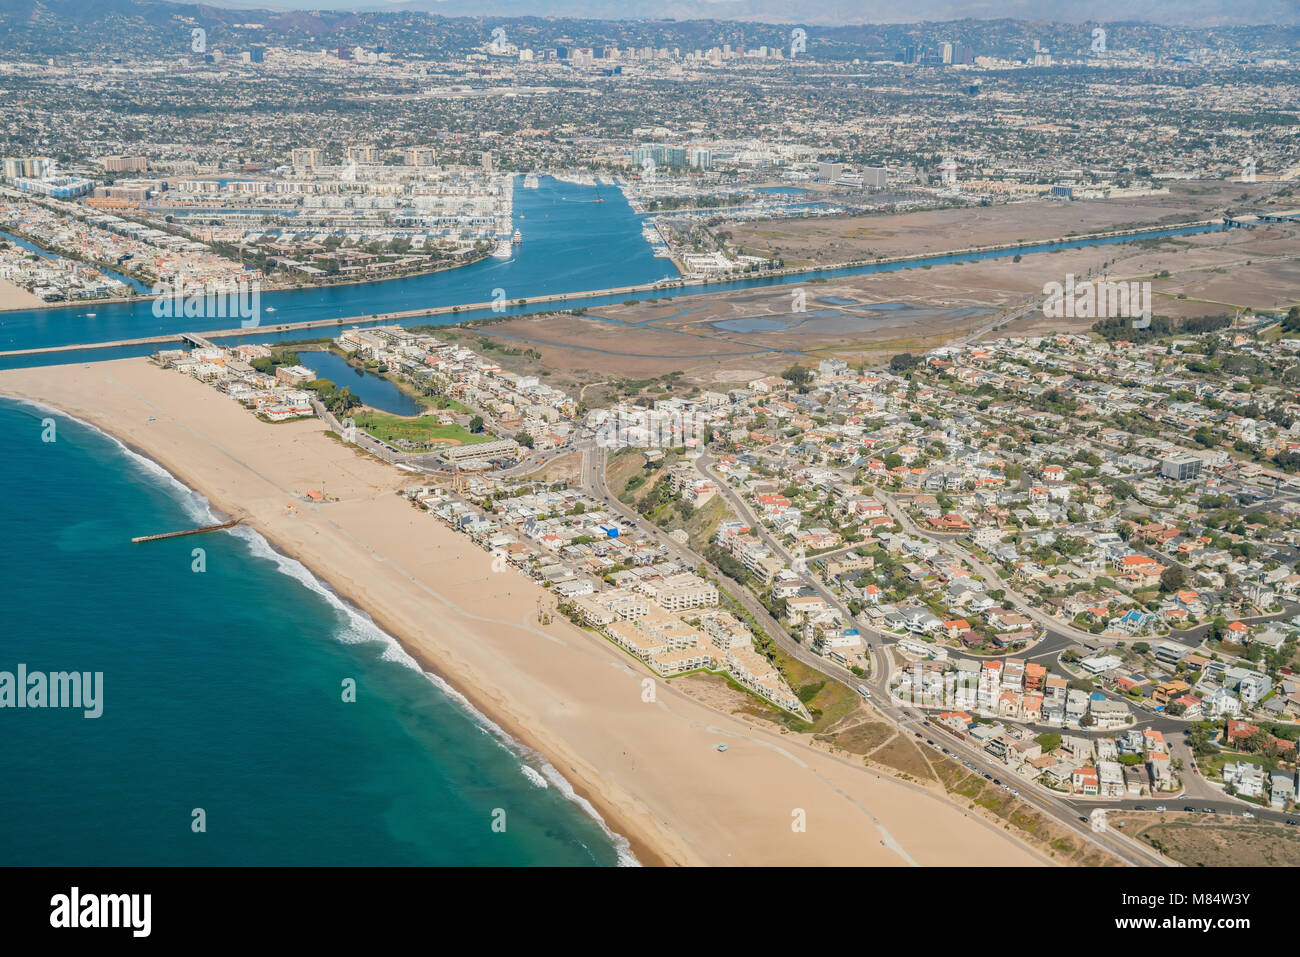 Aerial view of Marina Del Rey and Playa Del Rey aera from airplane, Los Angeles, California Stock Photo